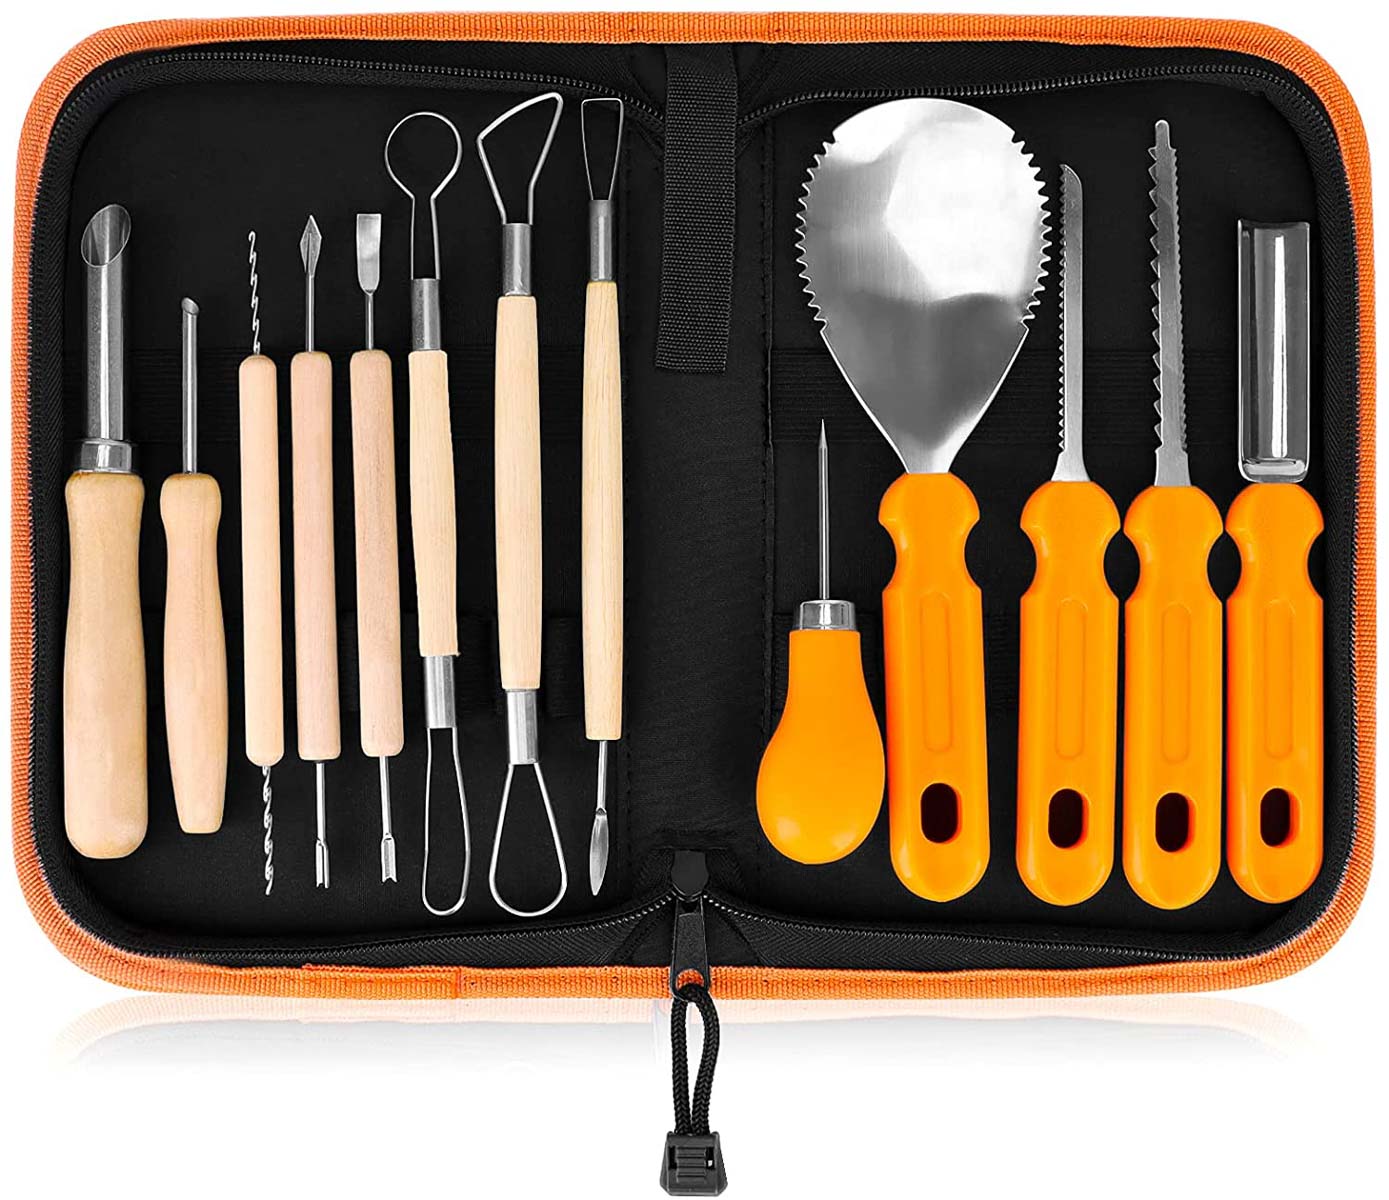 I have and love this pumpkin carving tool kit!